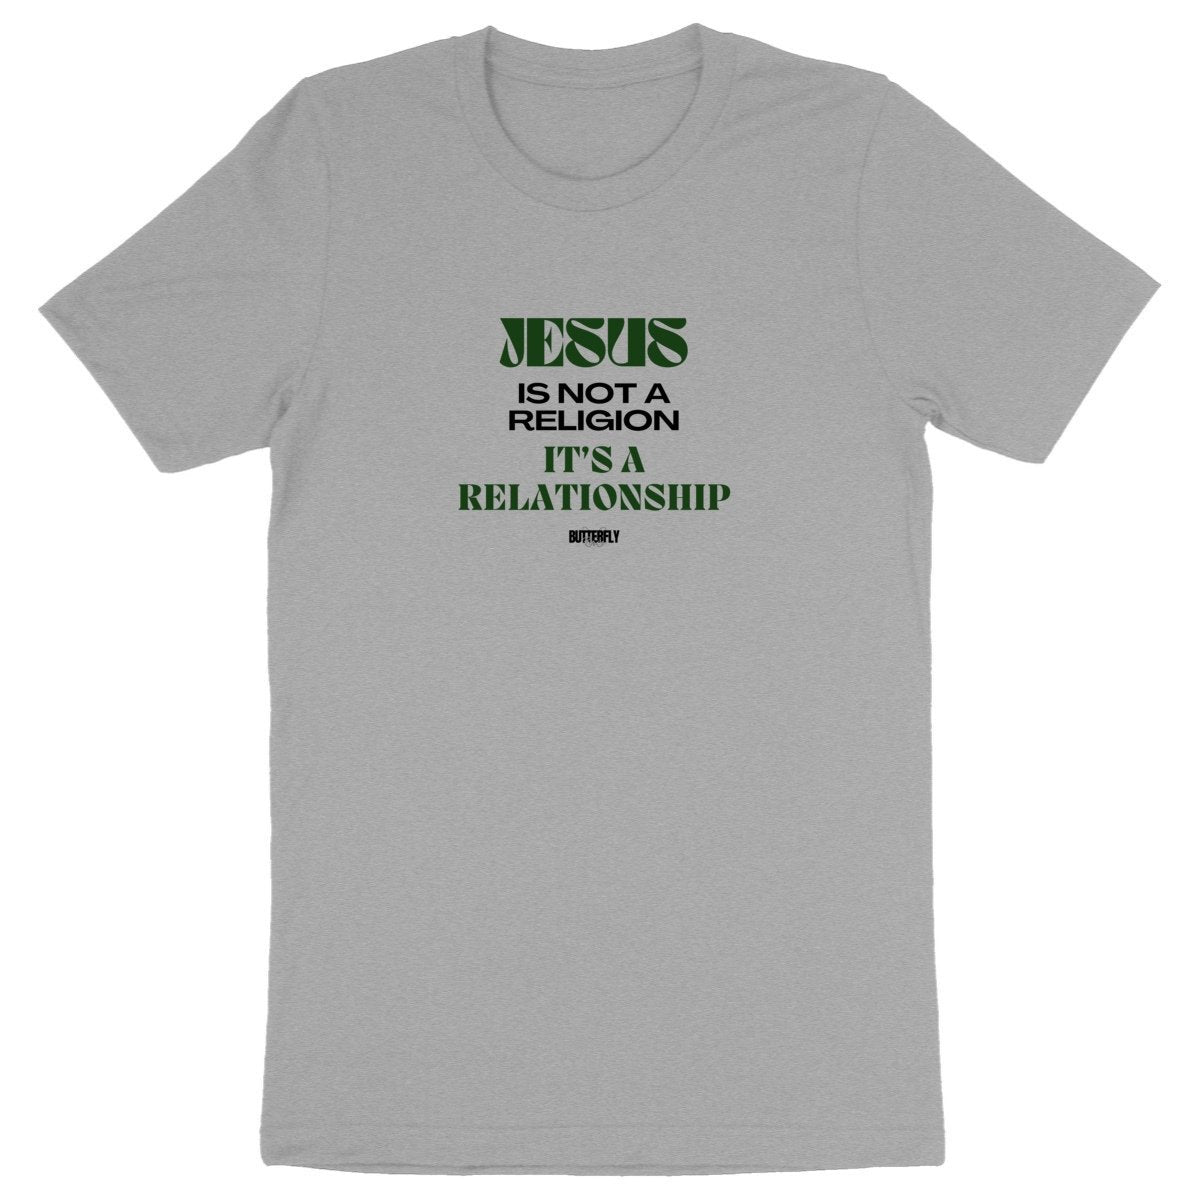 Tee shirt : Jesus is not a religion